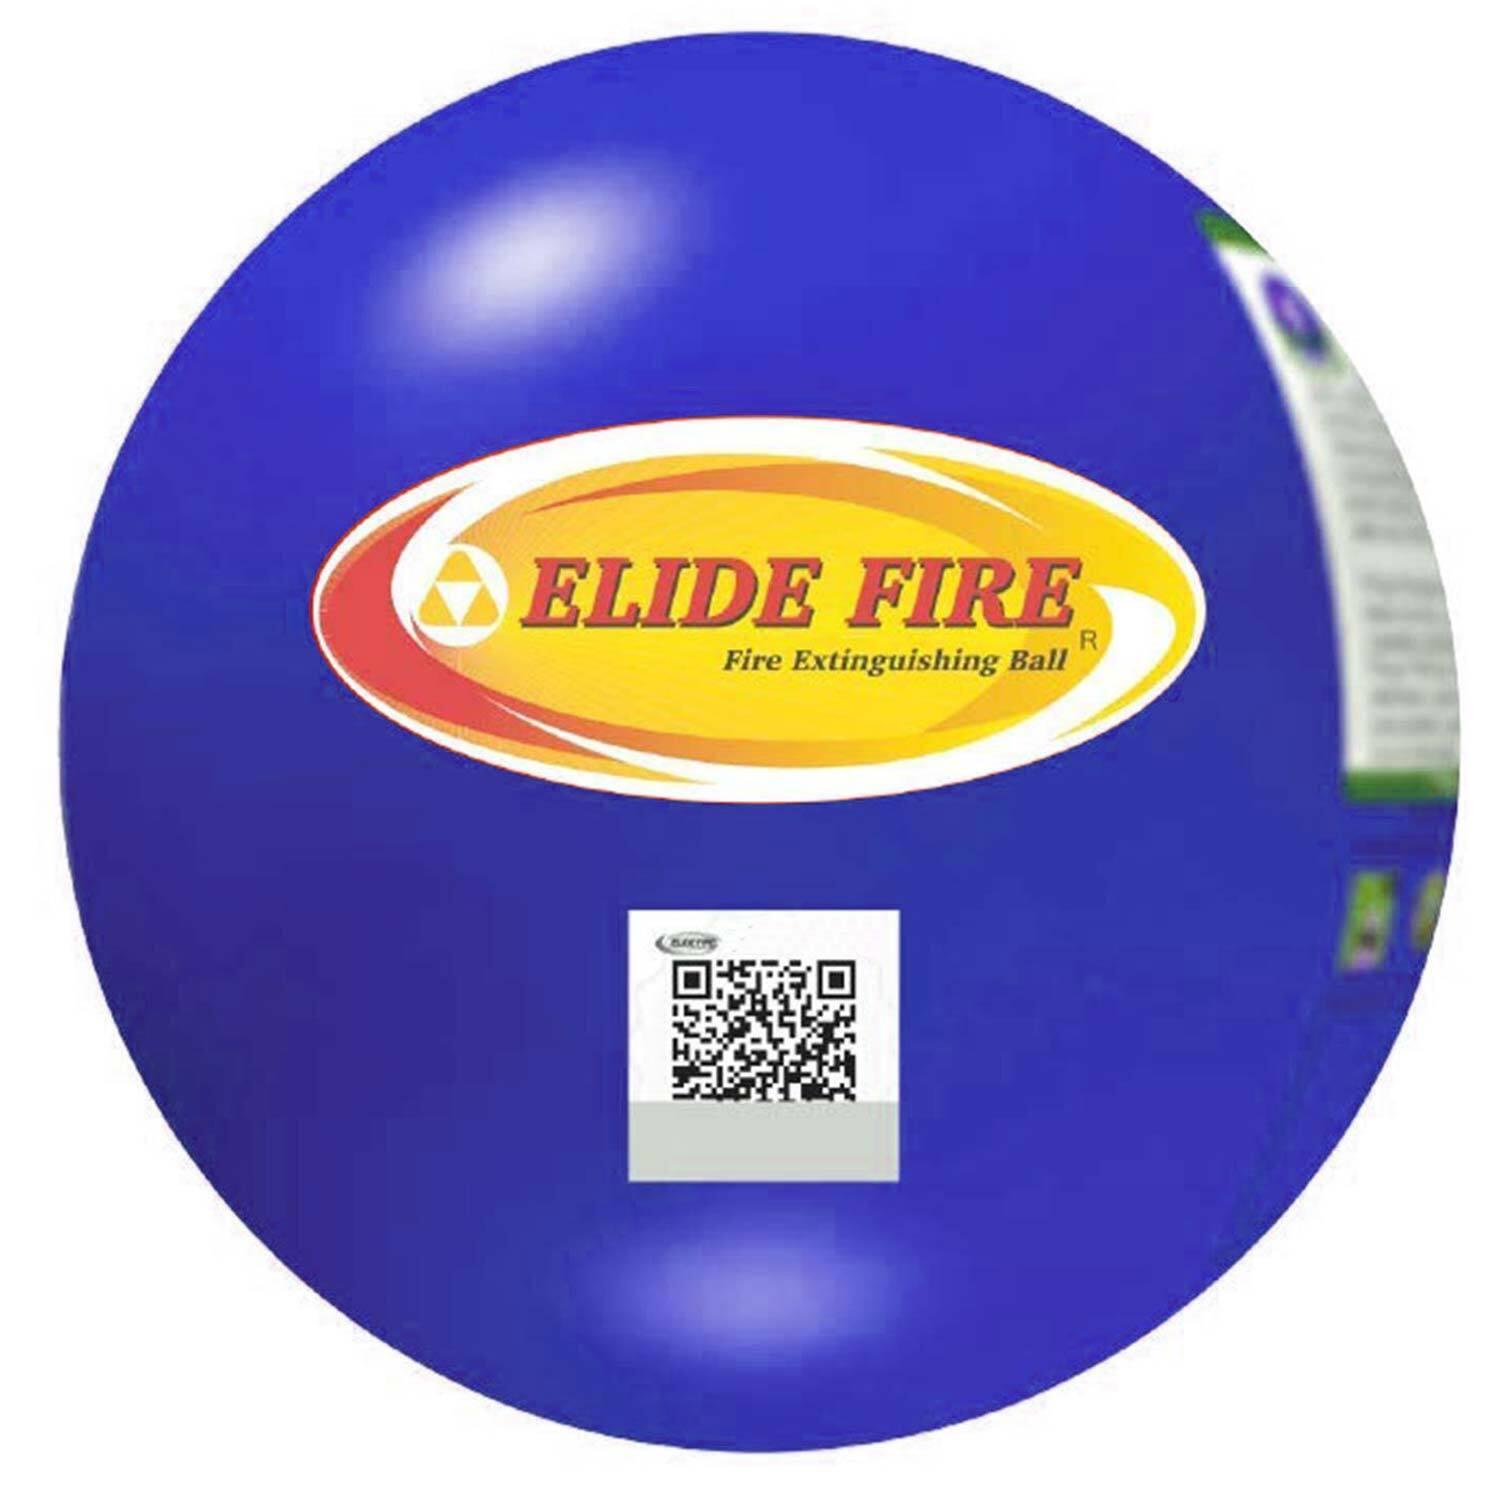 Elide Fire Extinguishing Ball- 12 Pieces